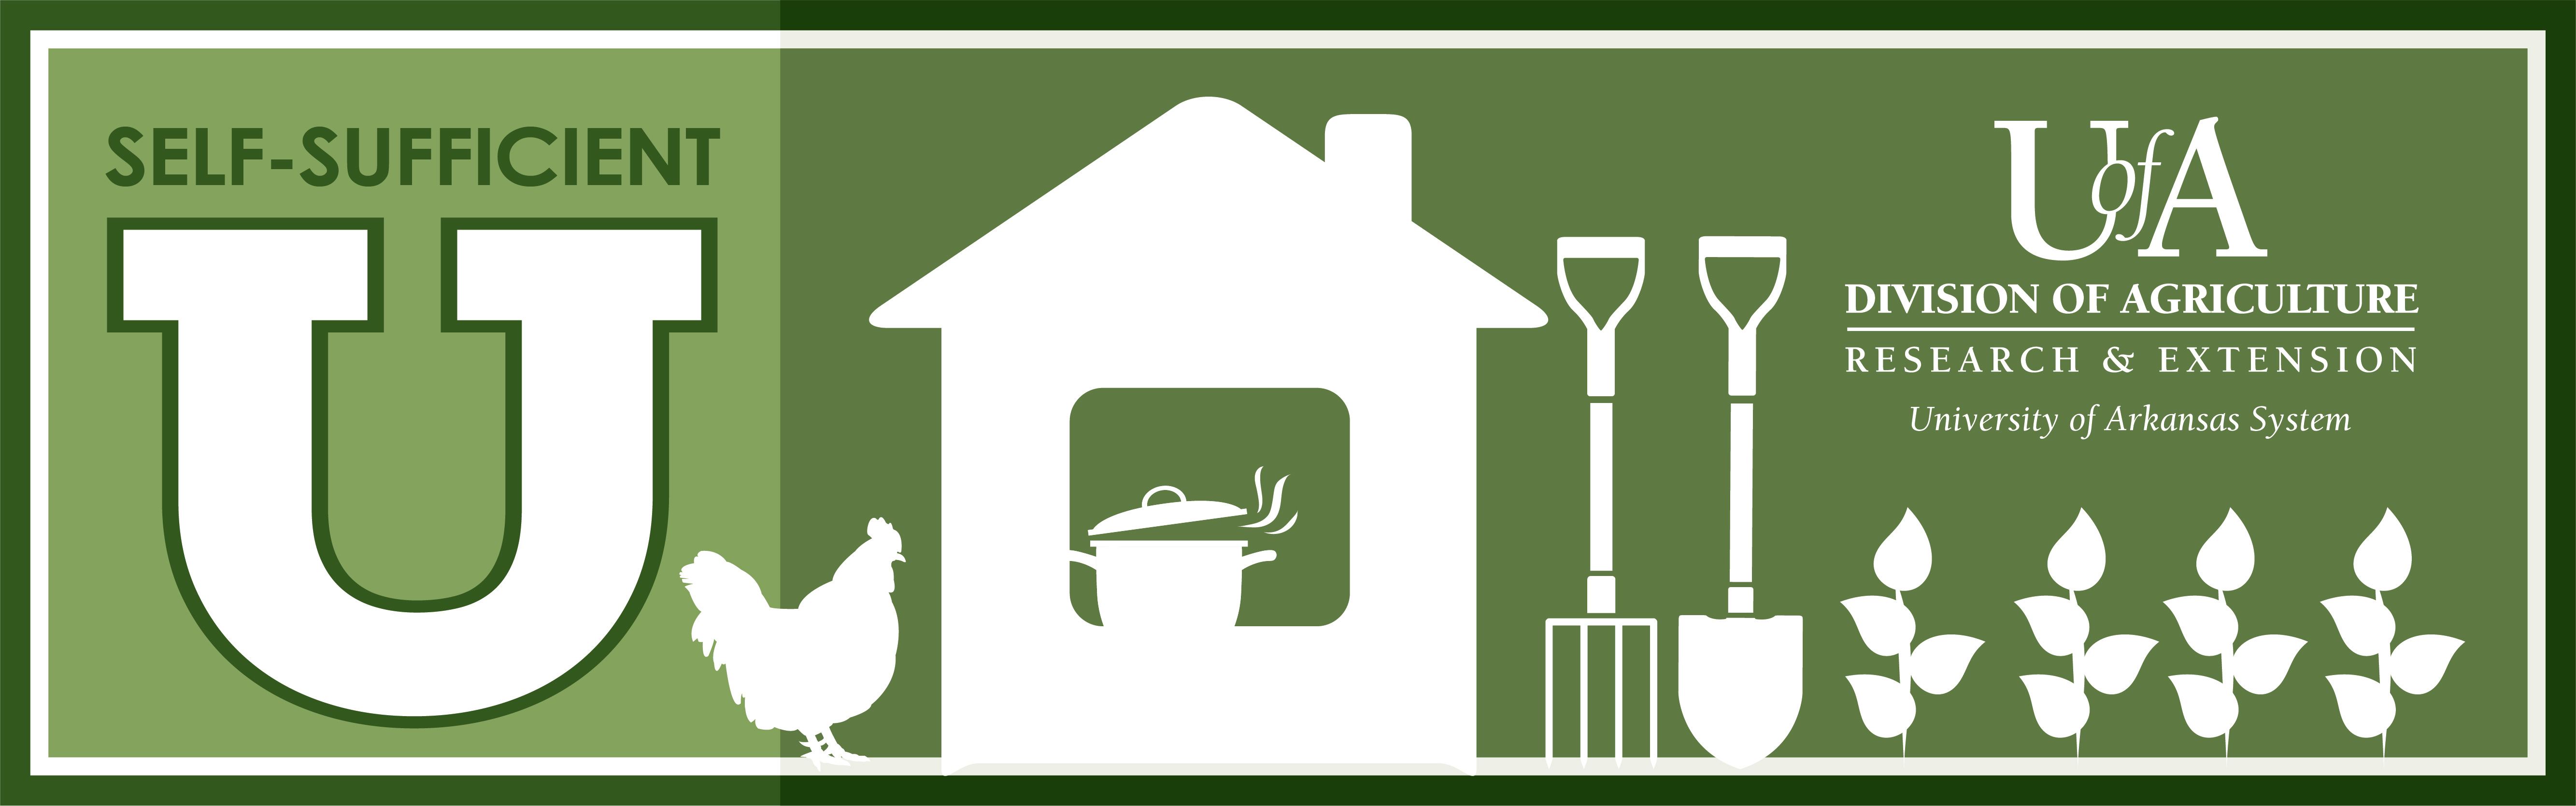 Self sufficient u - green logo with icons of a house, chickens, and gardening equipment